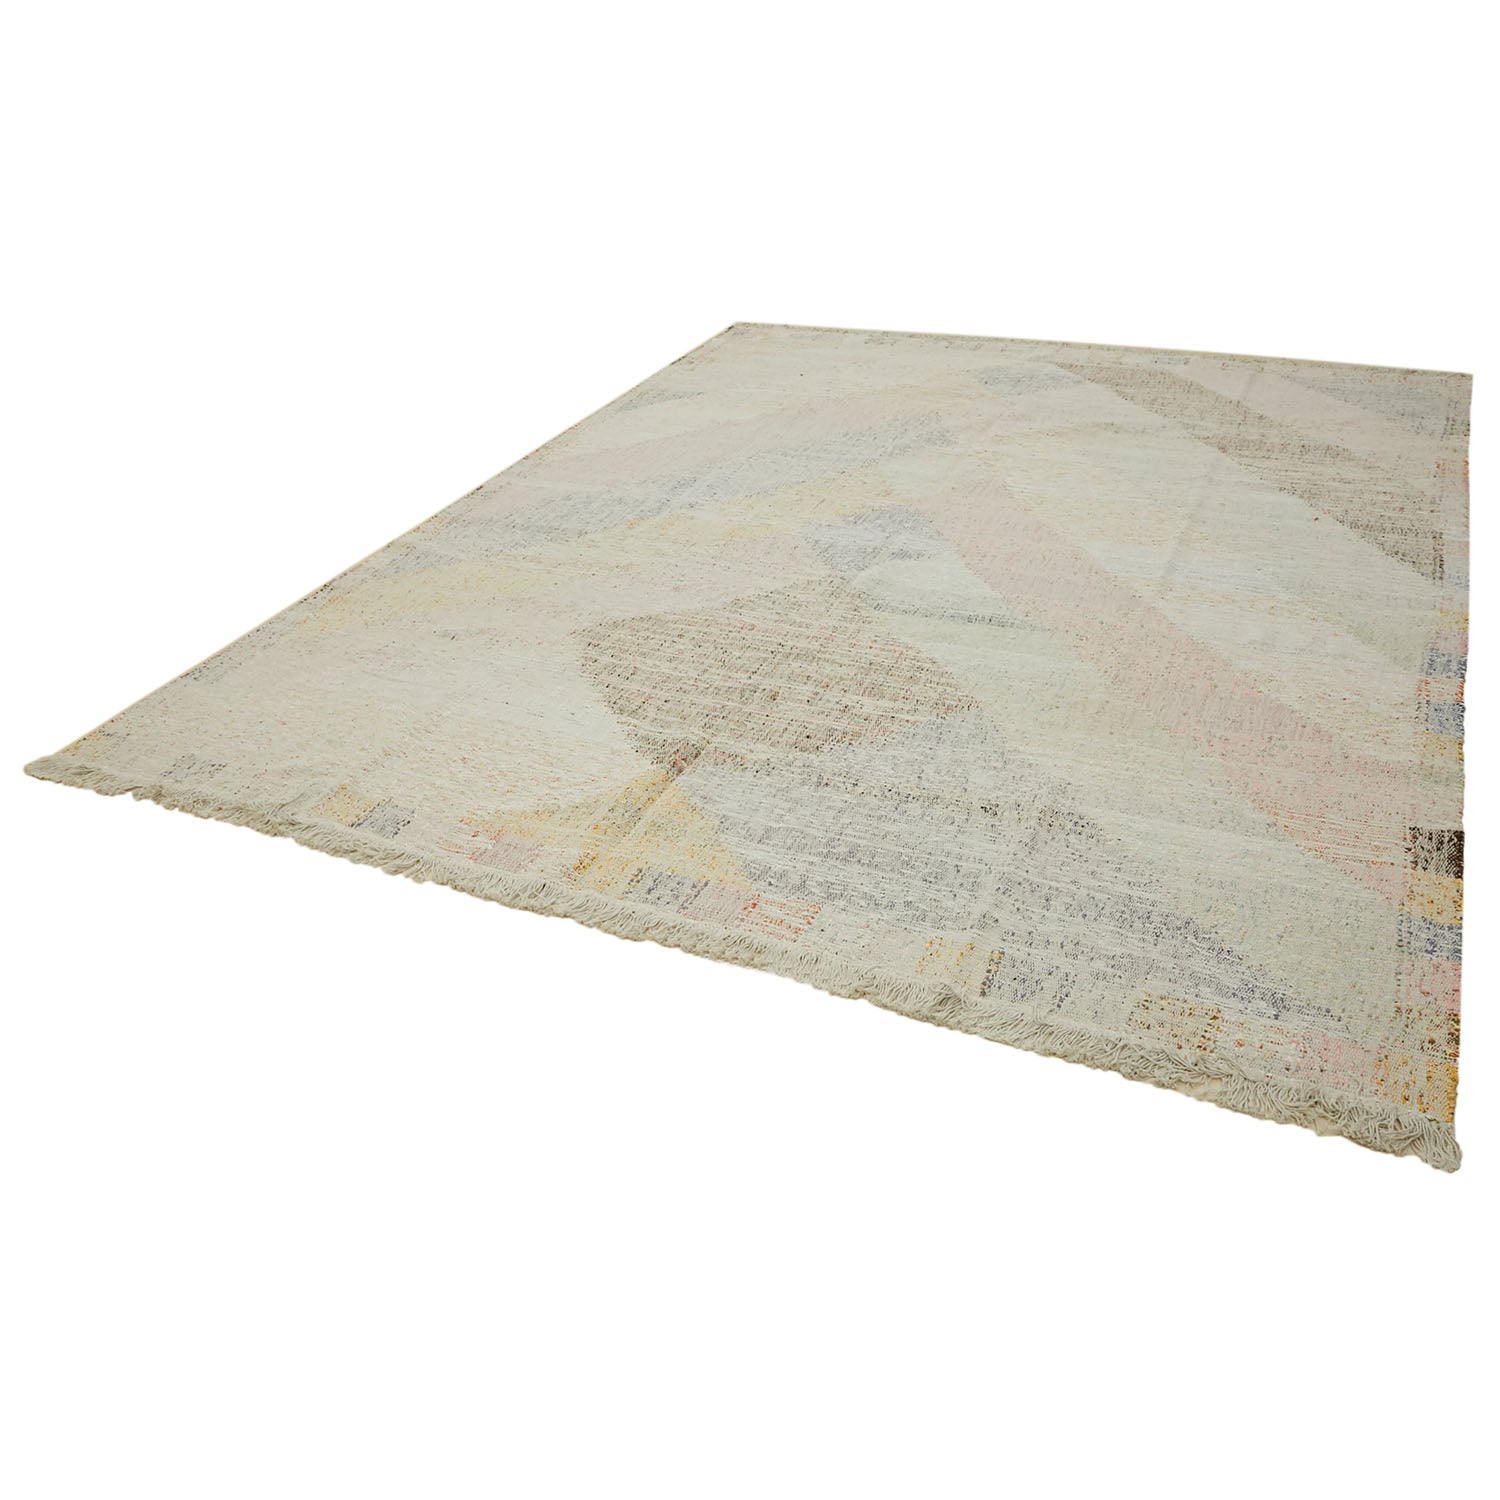 Flat-laid rug with subtle abstract design and soft muted colors.